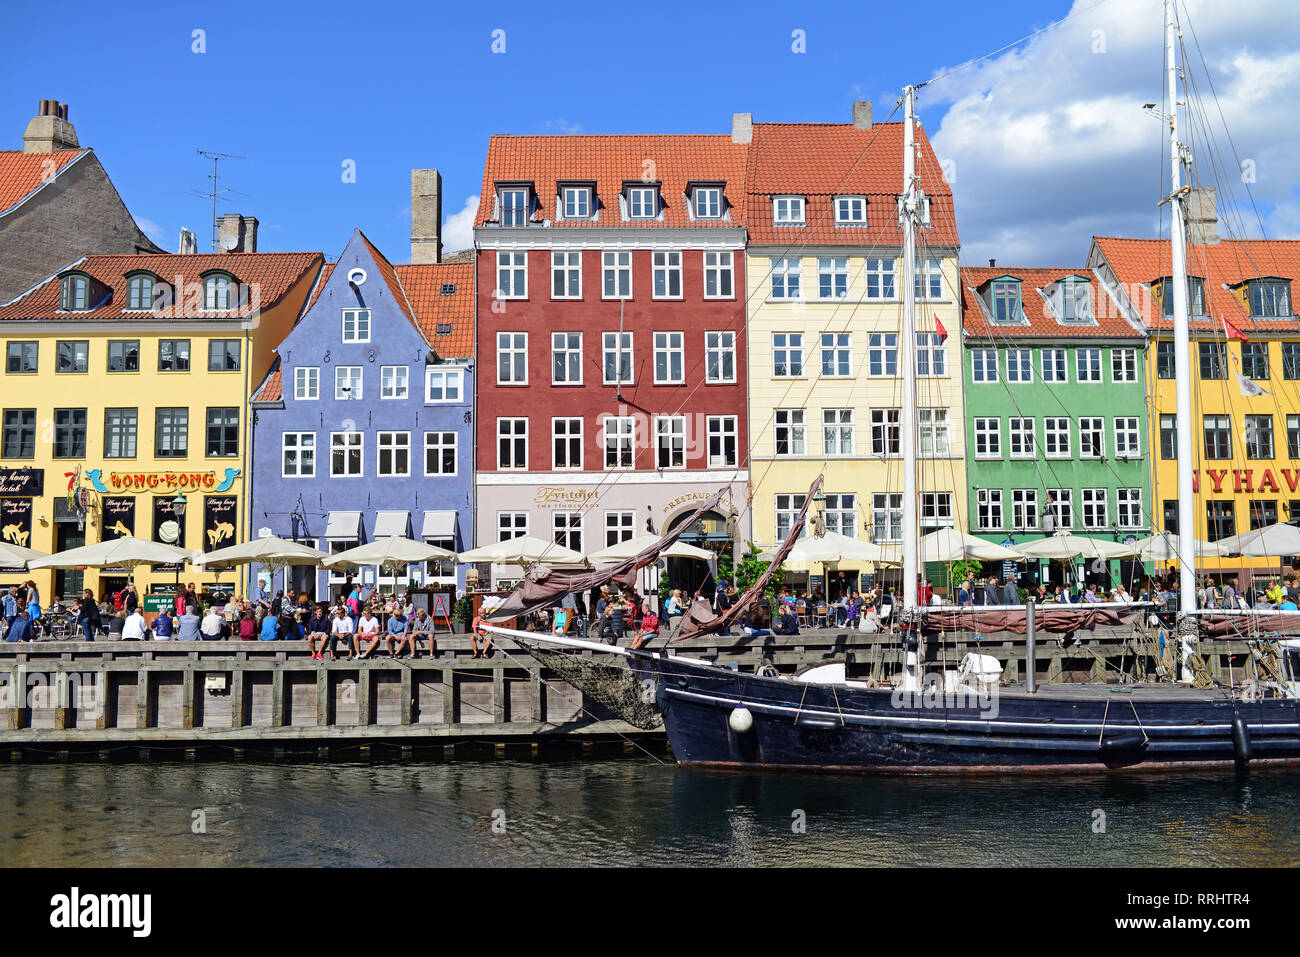 Nyhavn (literally: New Harbour), 17th-century waterfront, canal and entertainment district in Copenhagen, Denmark Stock Photo